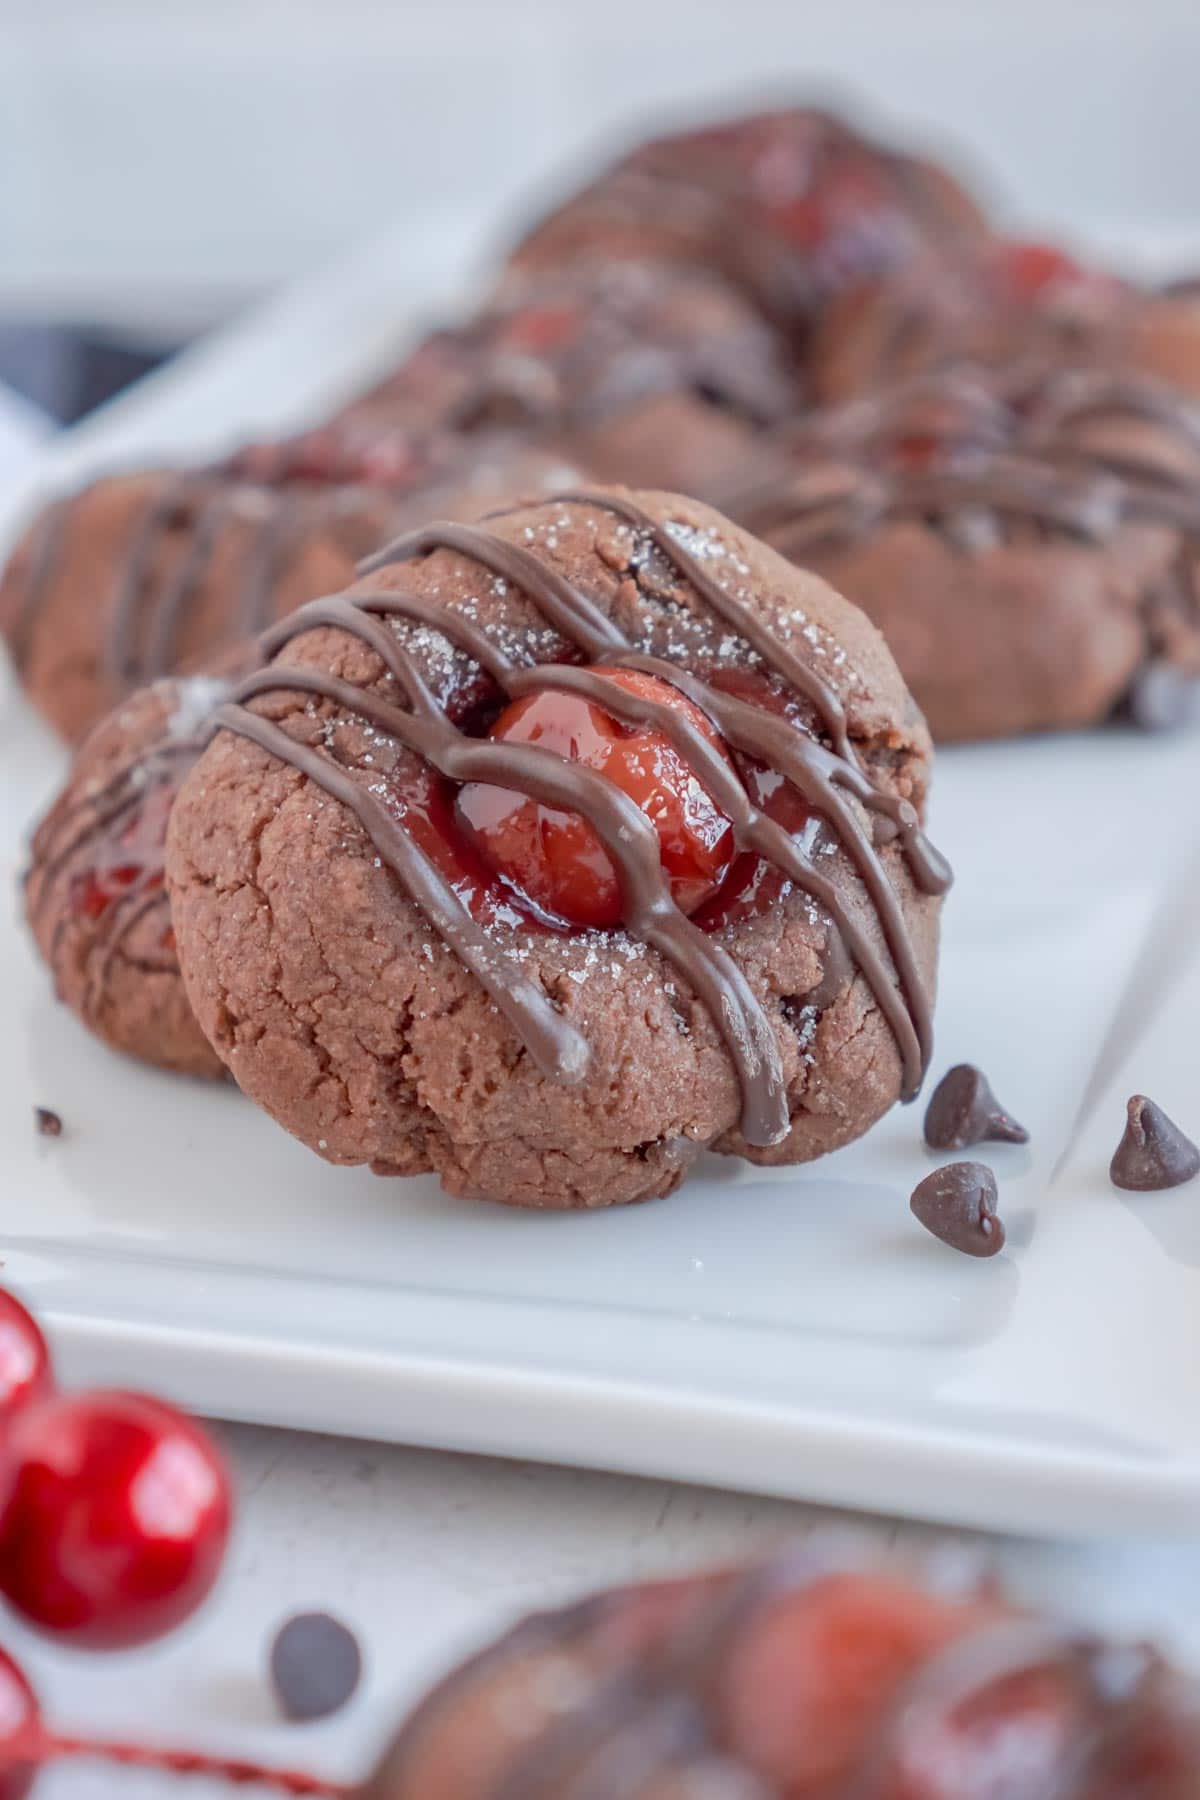 Plate with chocolate thumbprint cookies